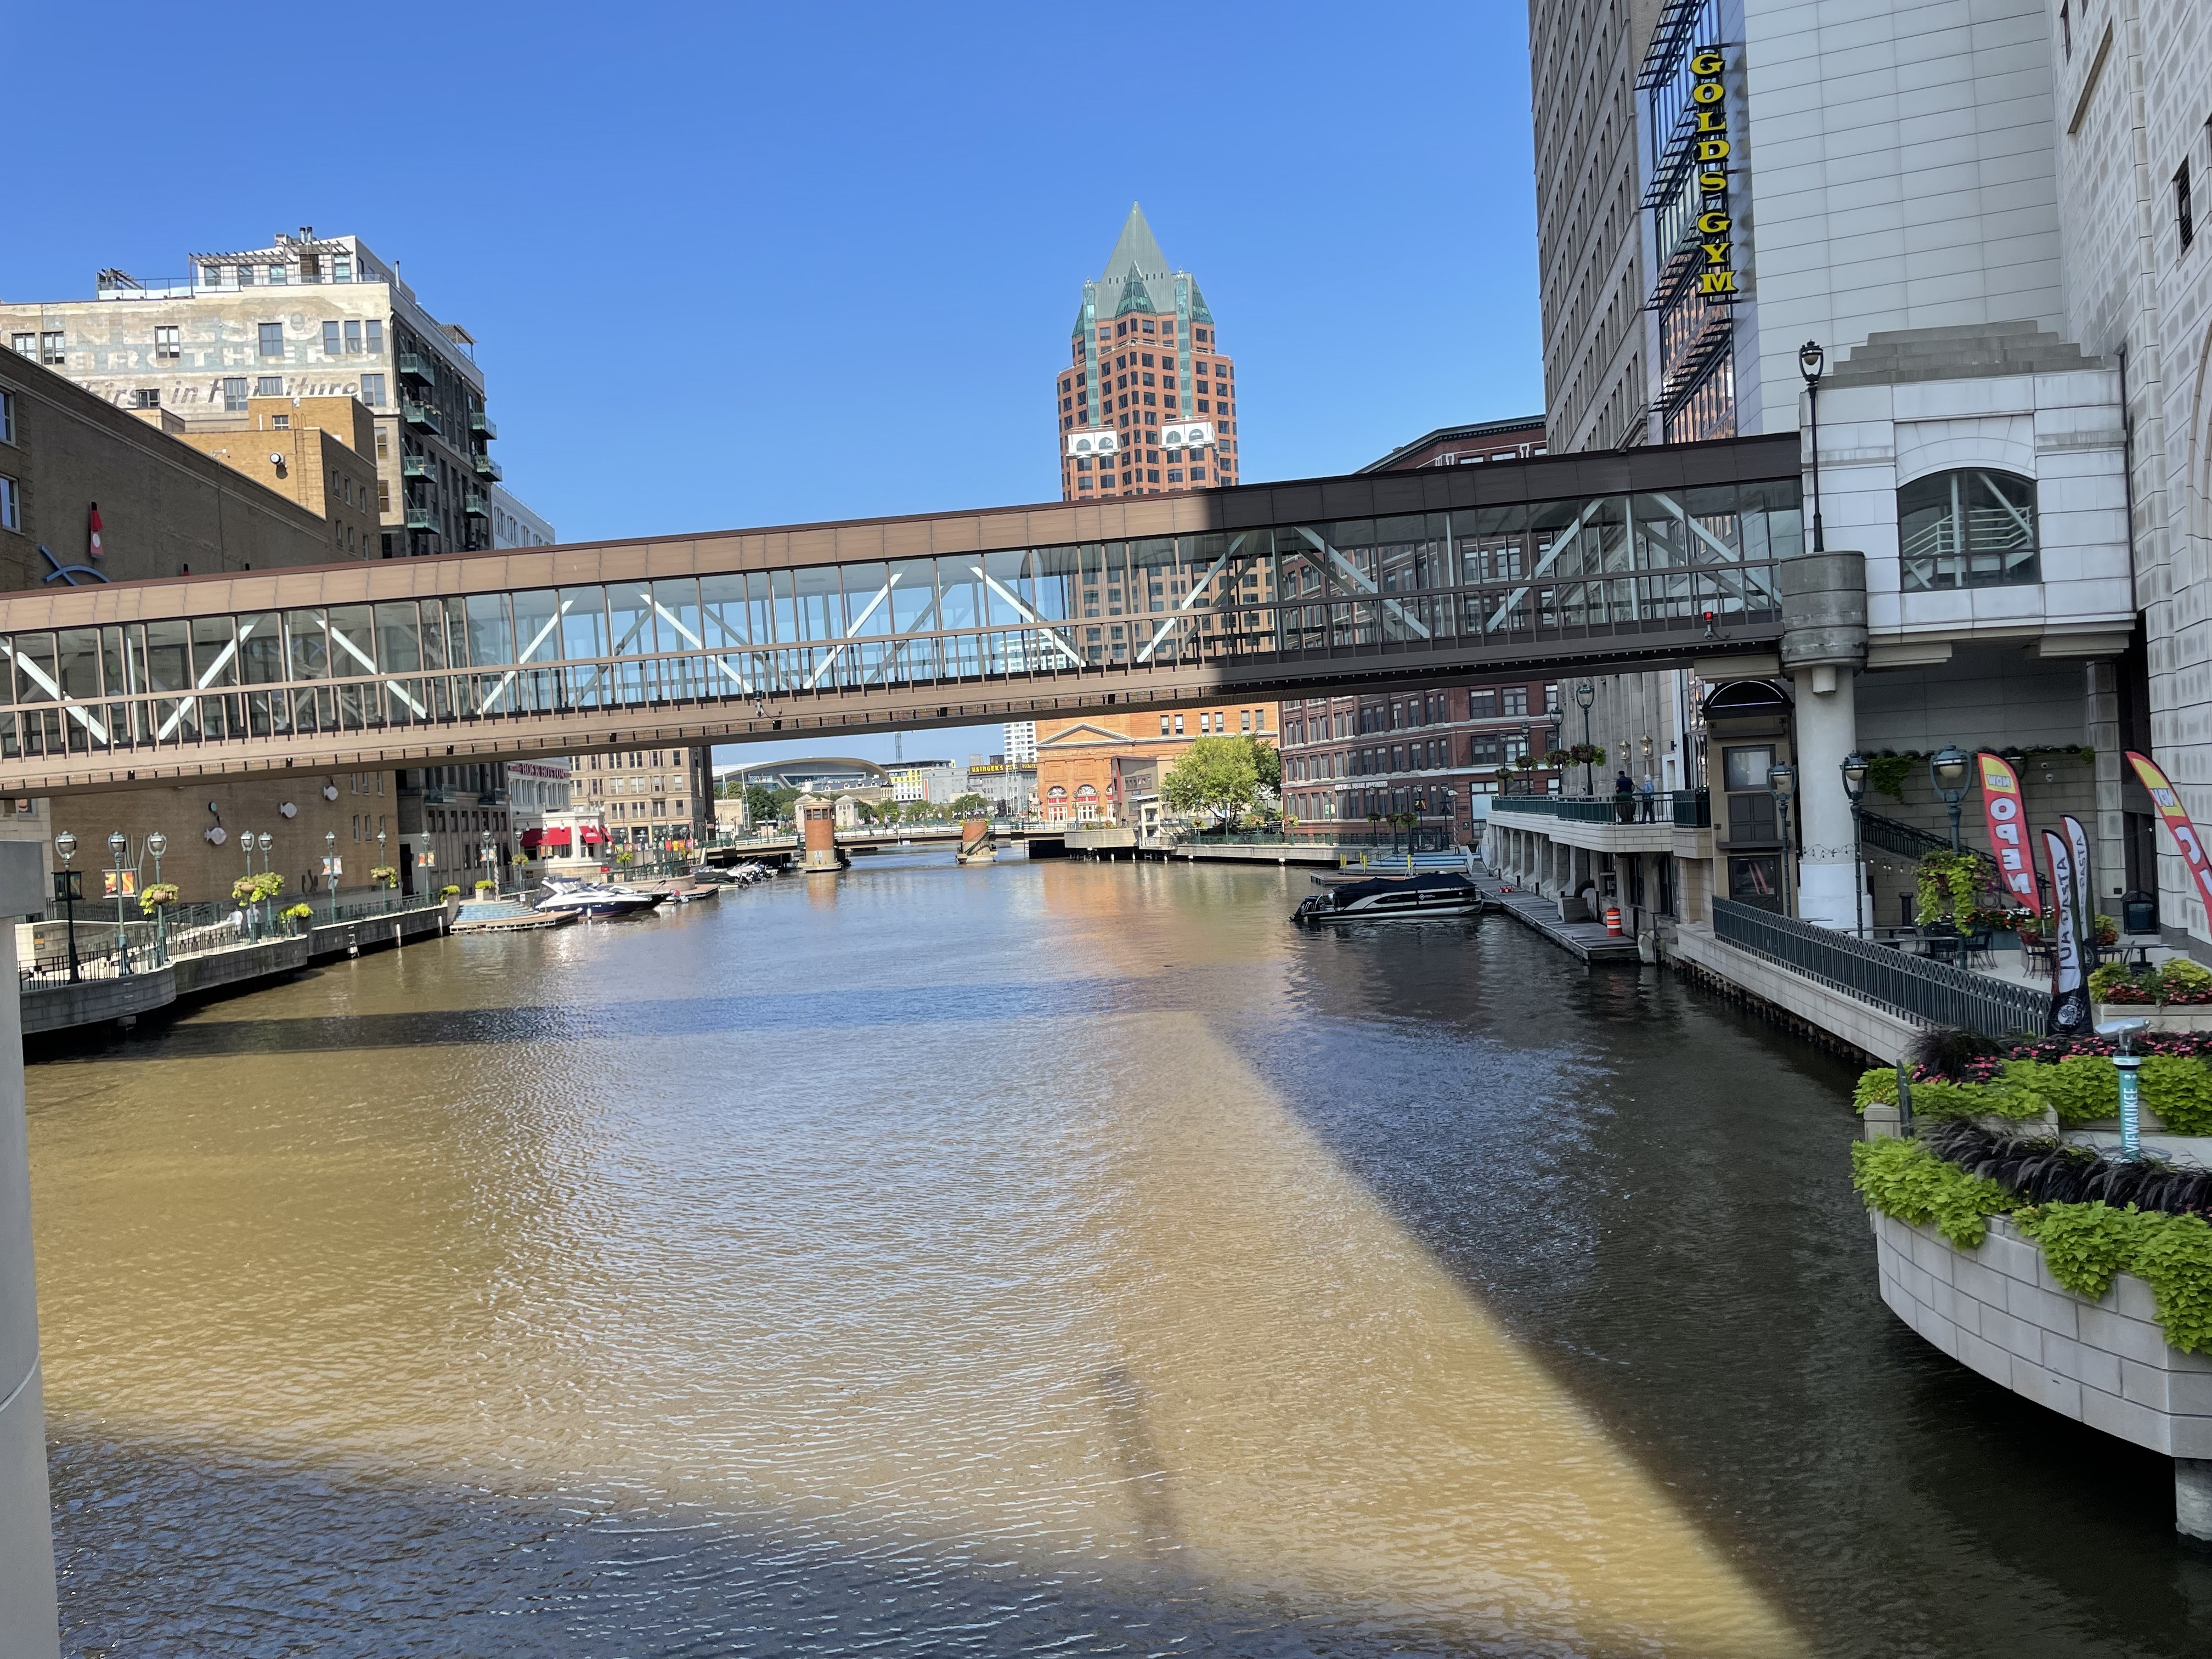 The Milwaukee River winds right through downtown, and is pictured here after a major rainstorm